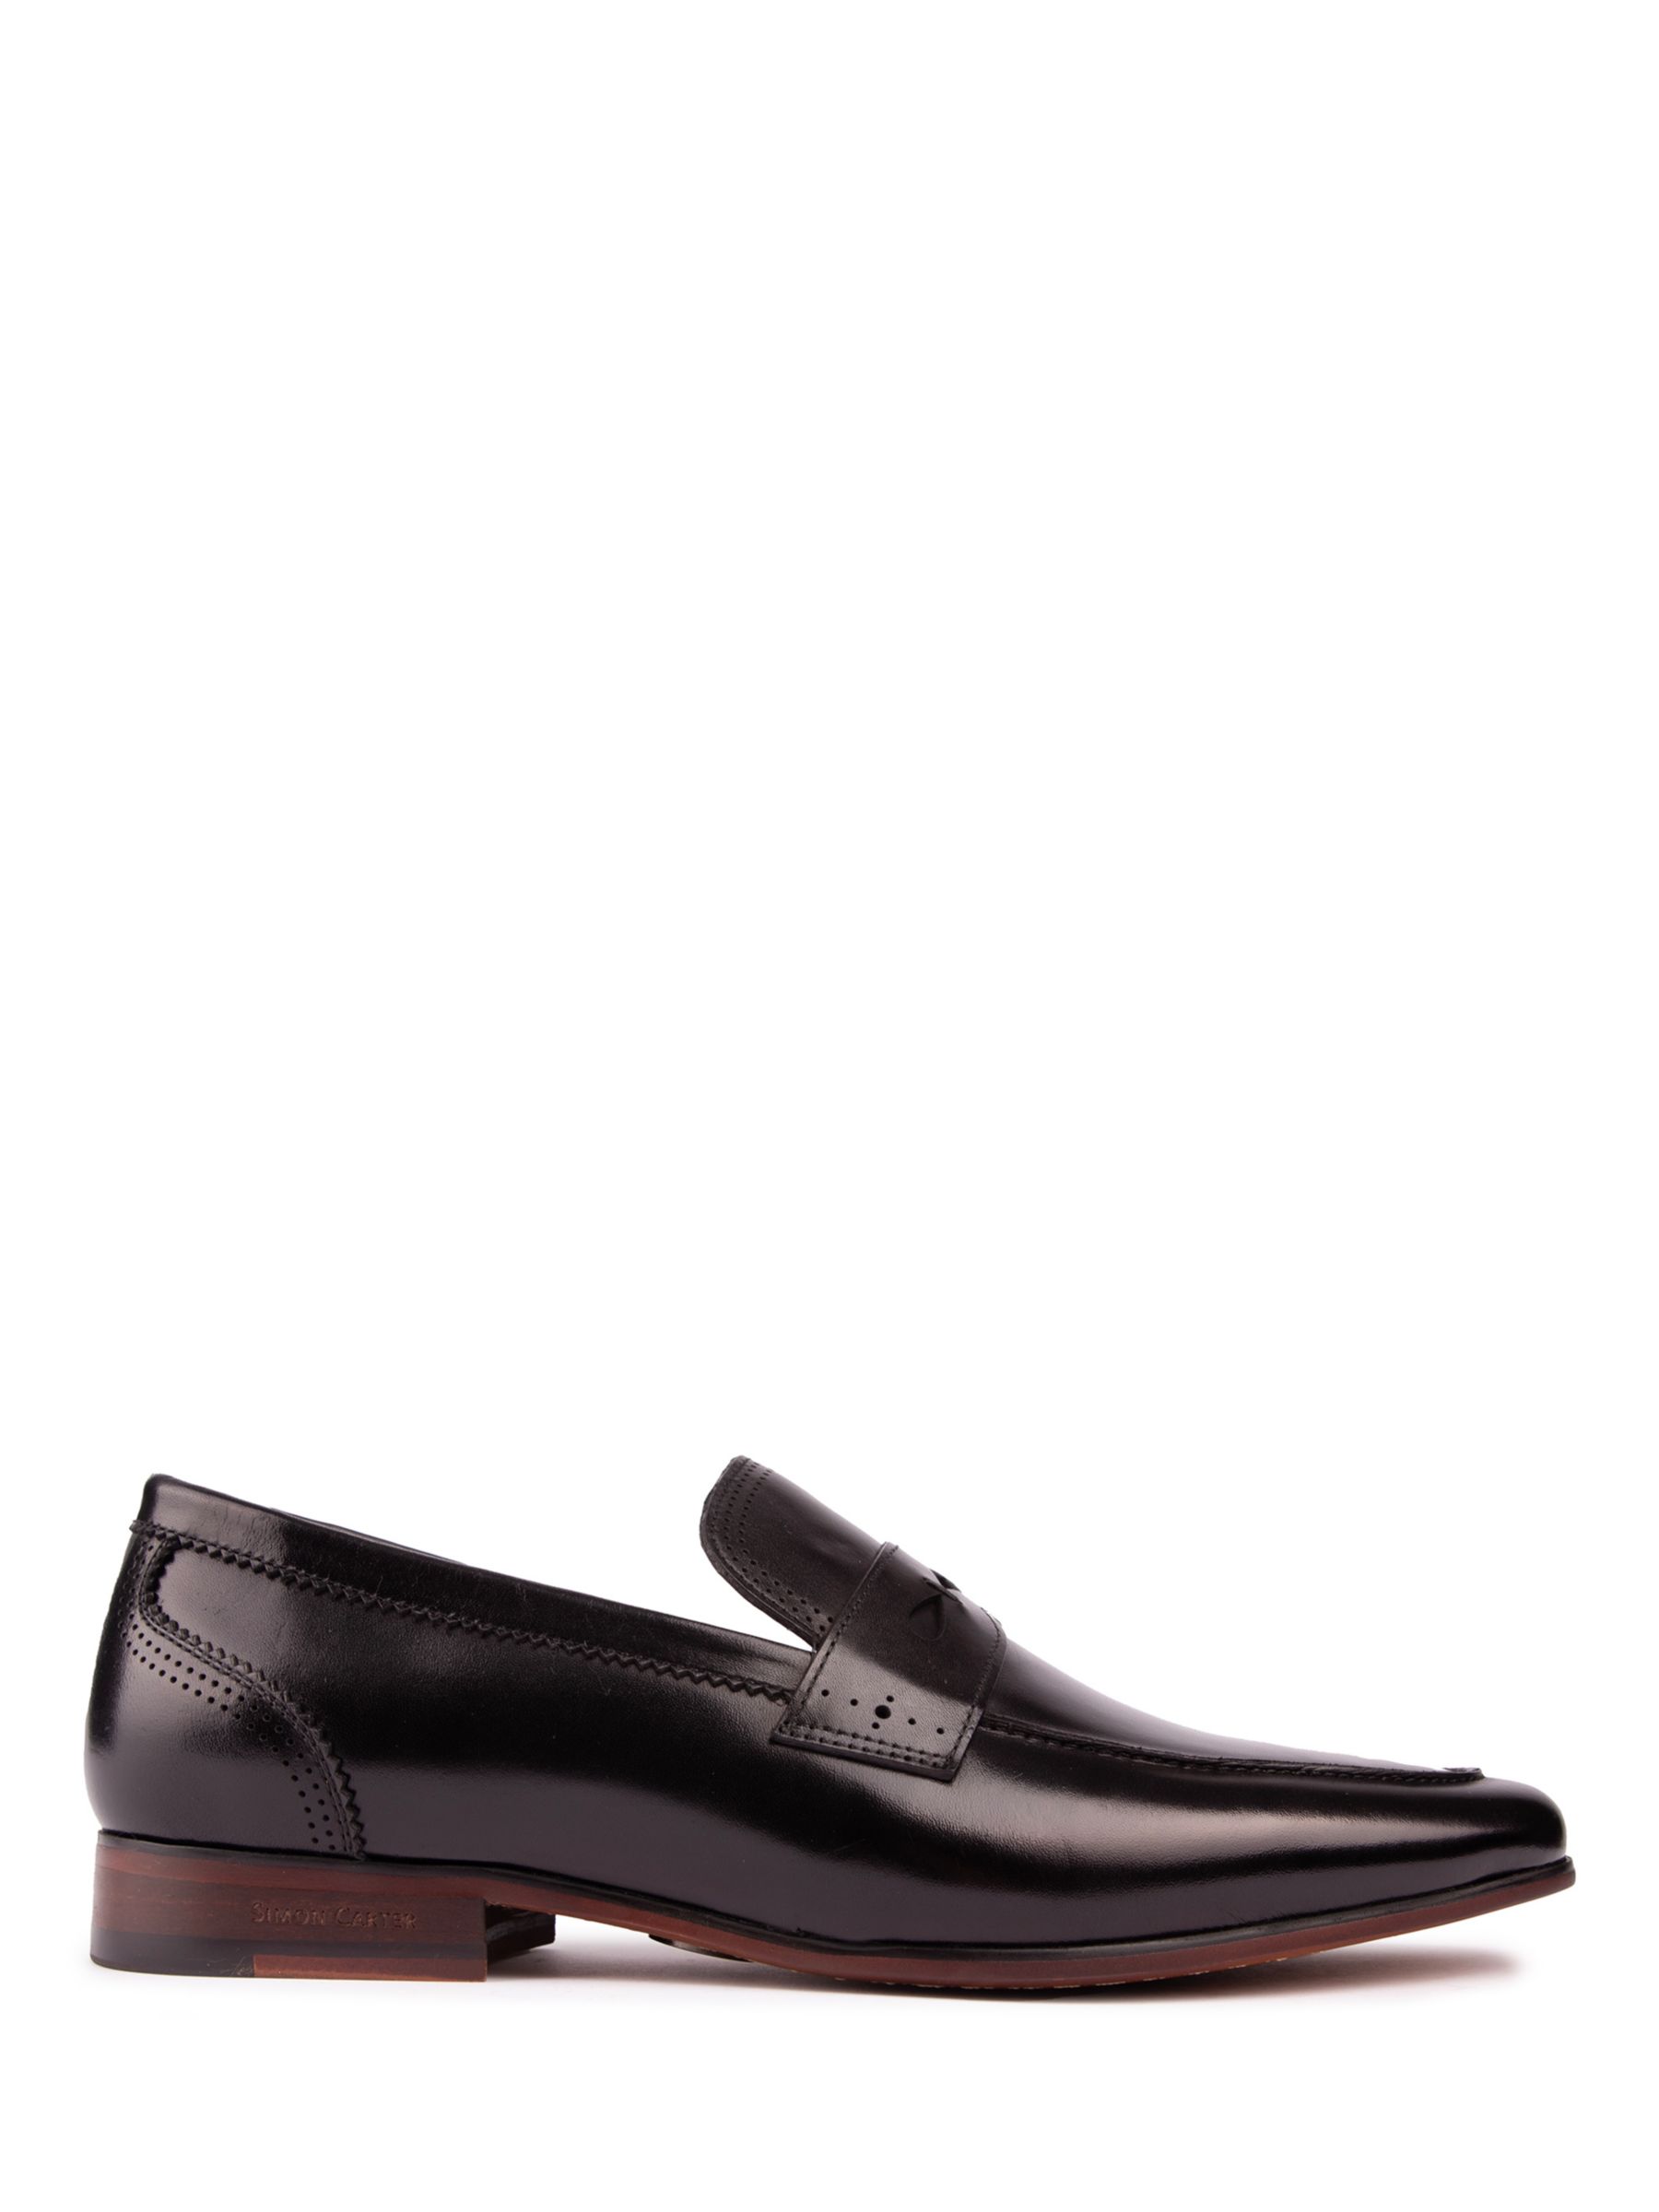 Simon Carter Pike Leather Loafers, Black at John Lewis & Partners